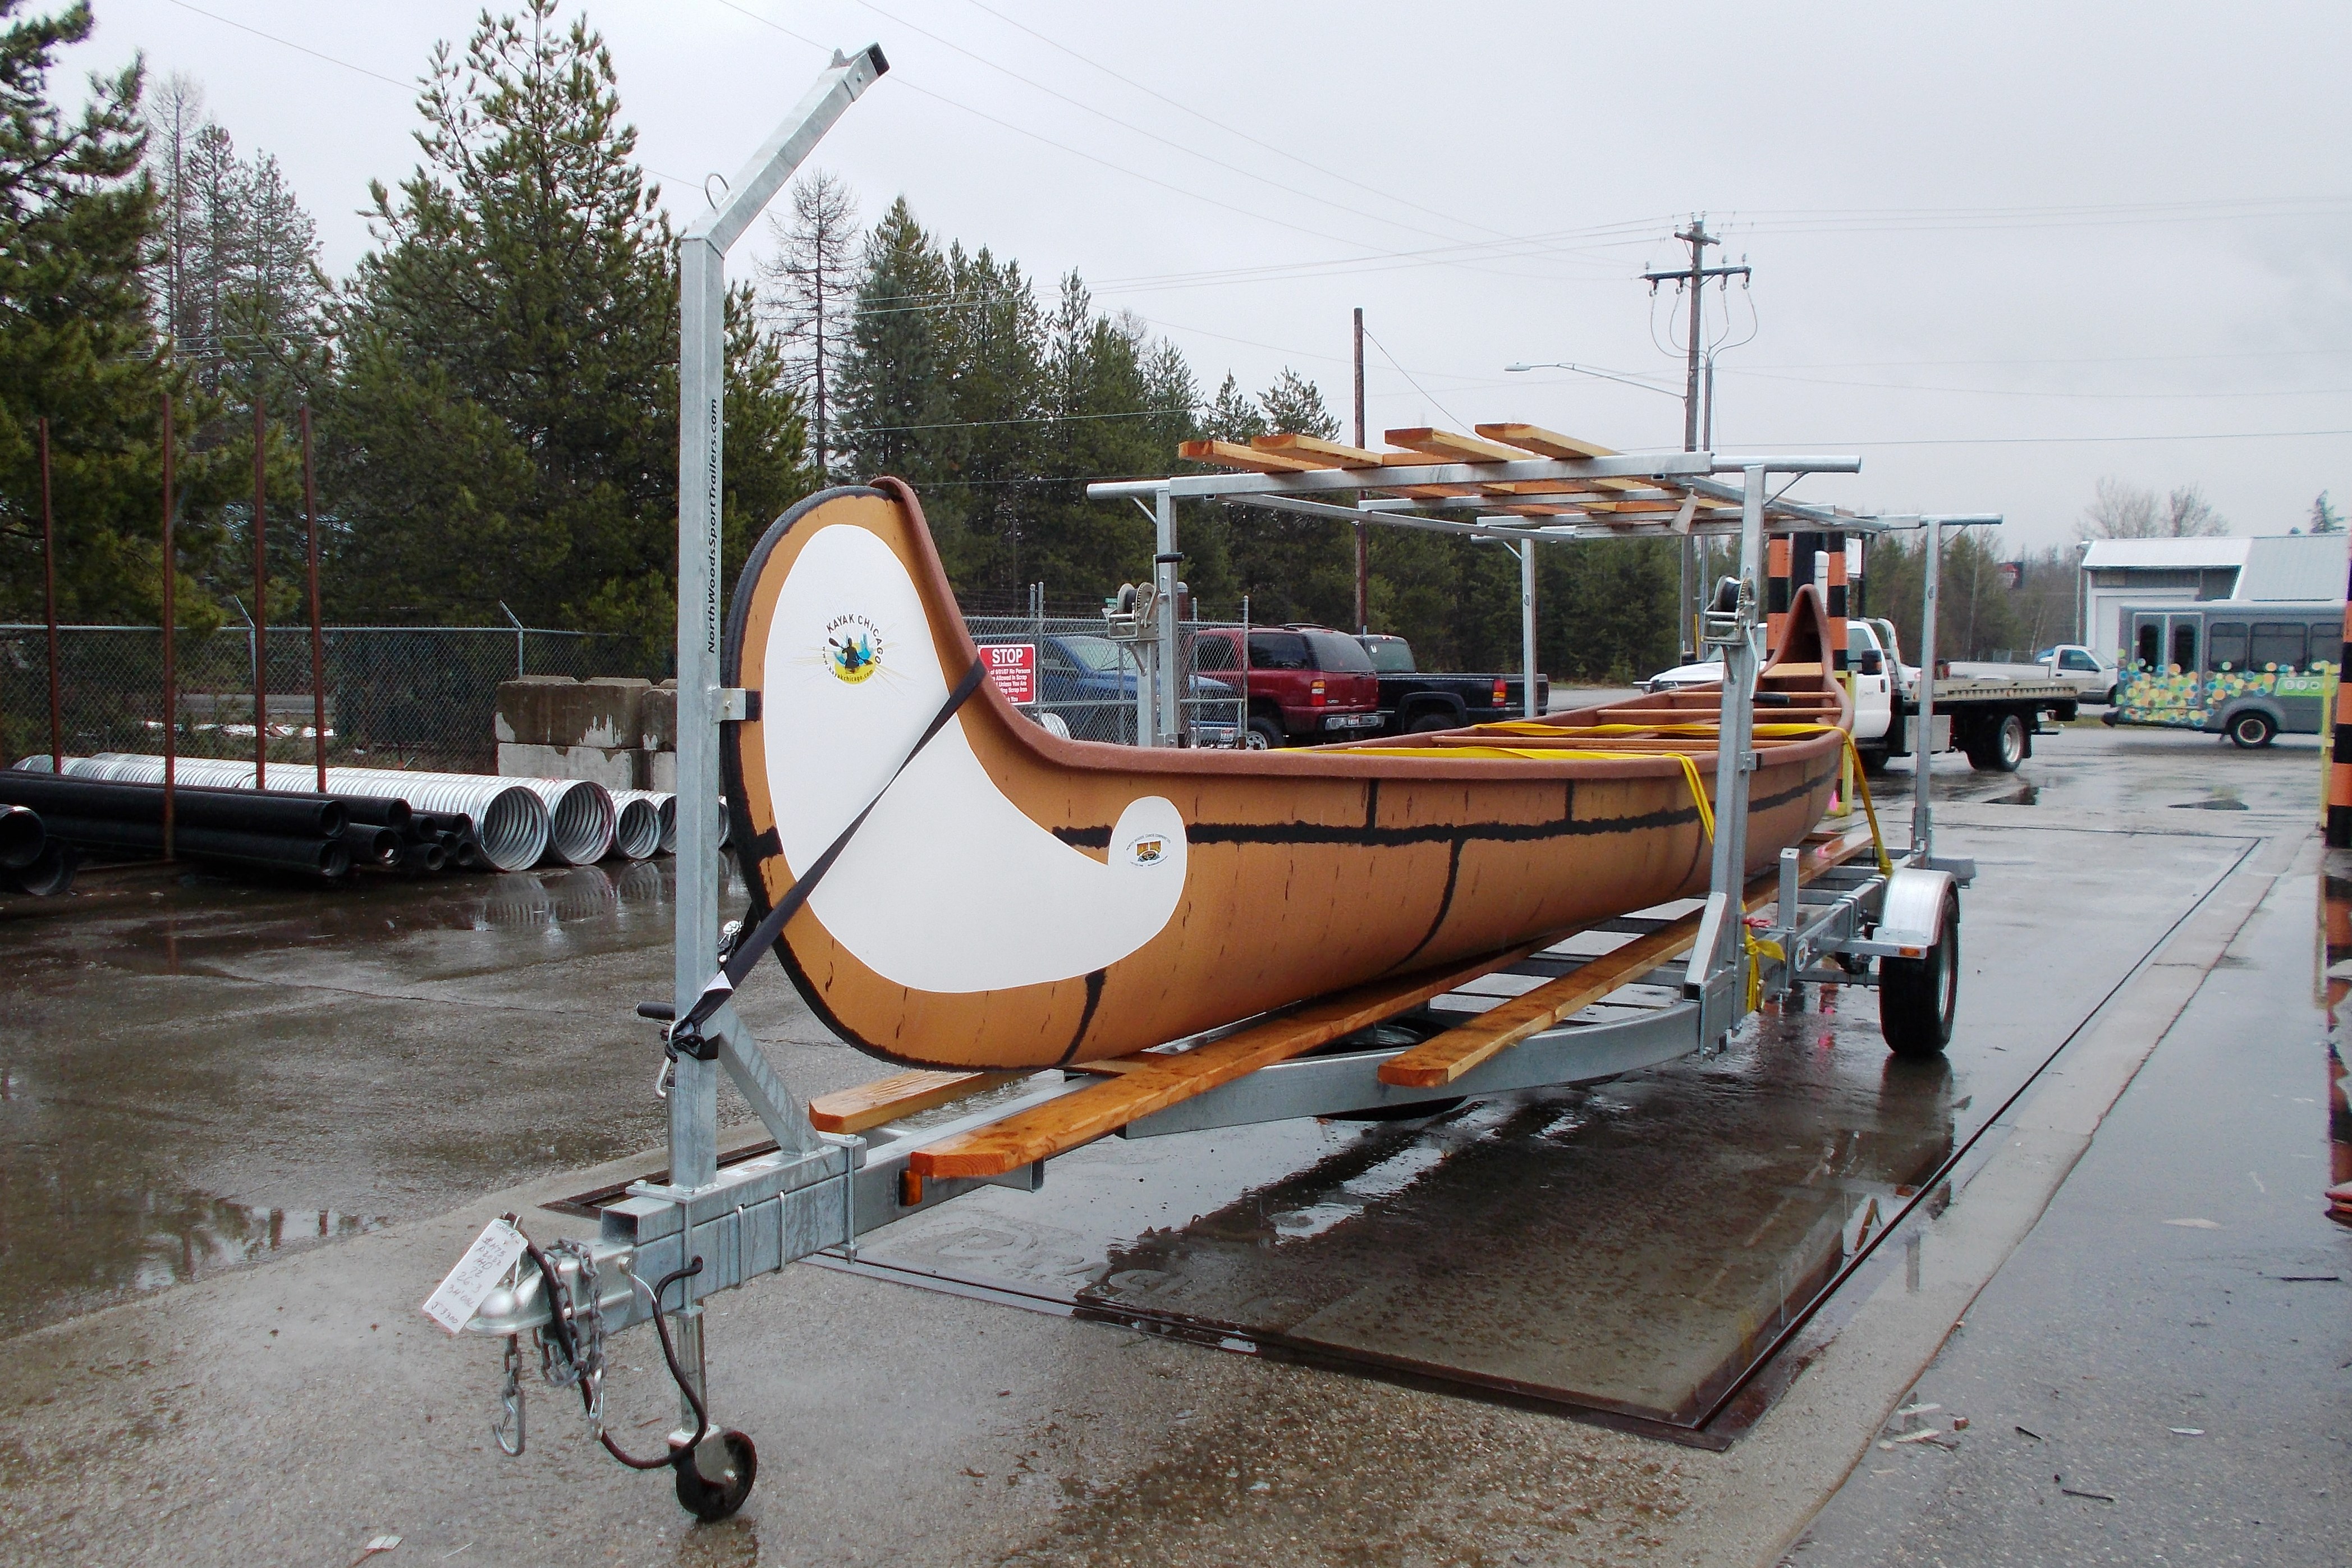 Transport, Storage & Launching: Specialty Canoe, Kayak, SUP, Outrigger, Big Canoe, York Boat  Trailers by North Woods Sport Trailers - Image 4532